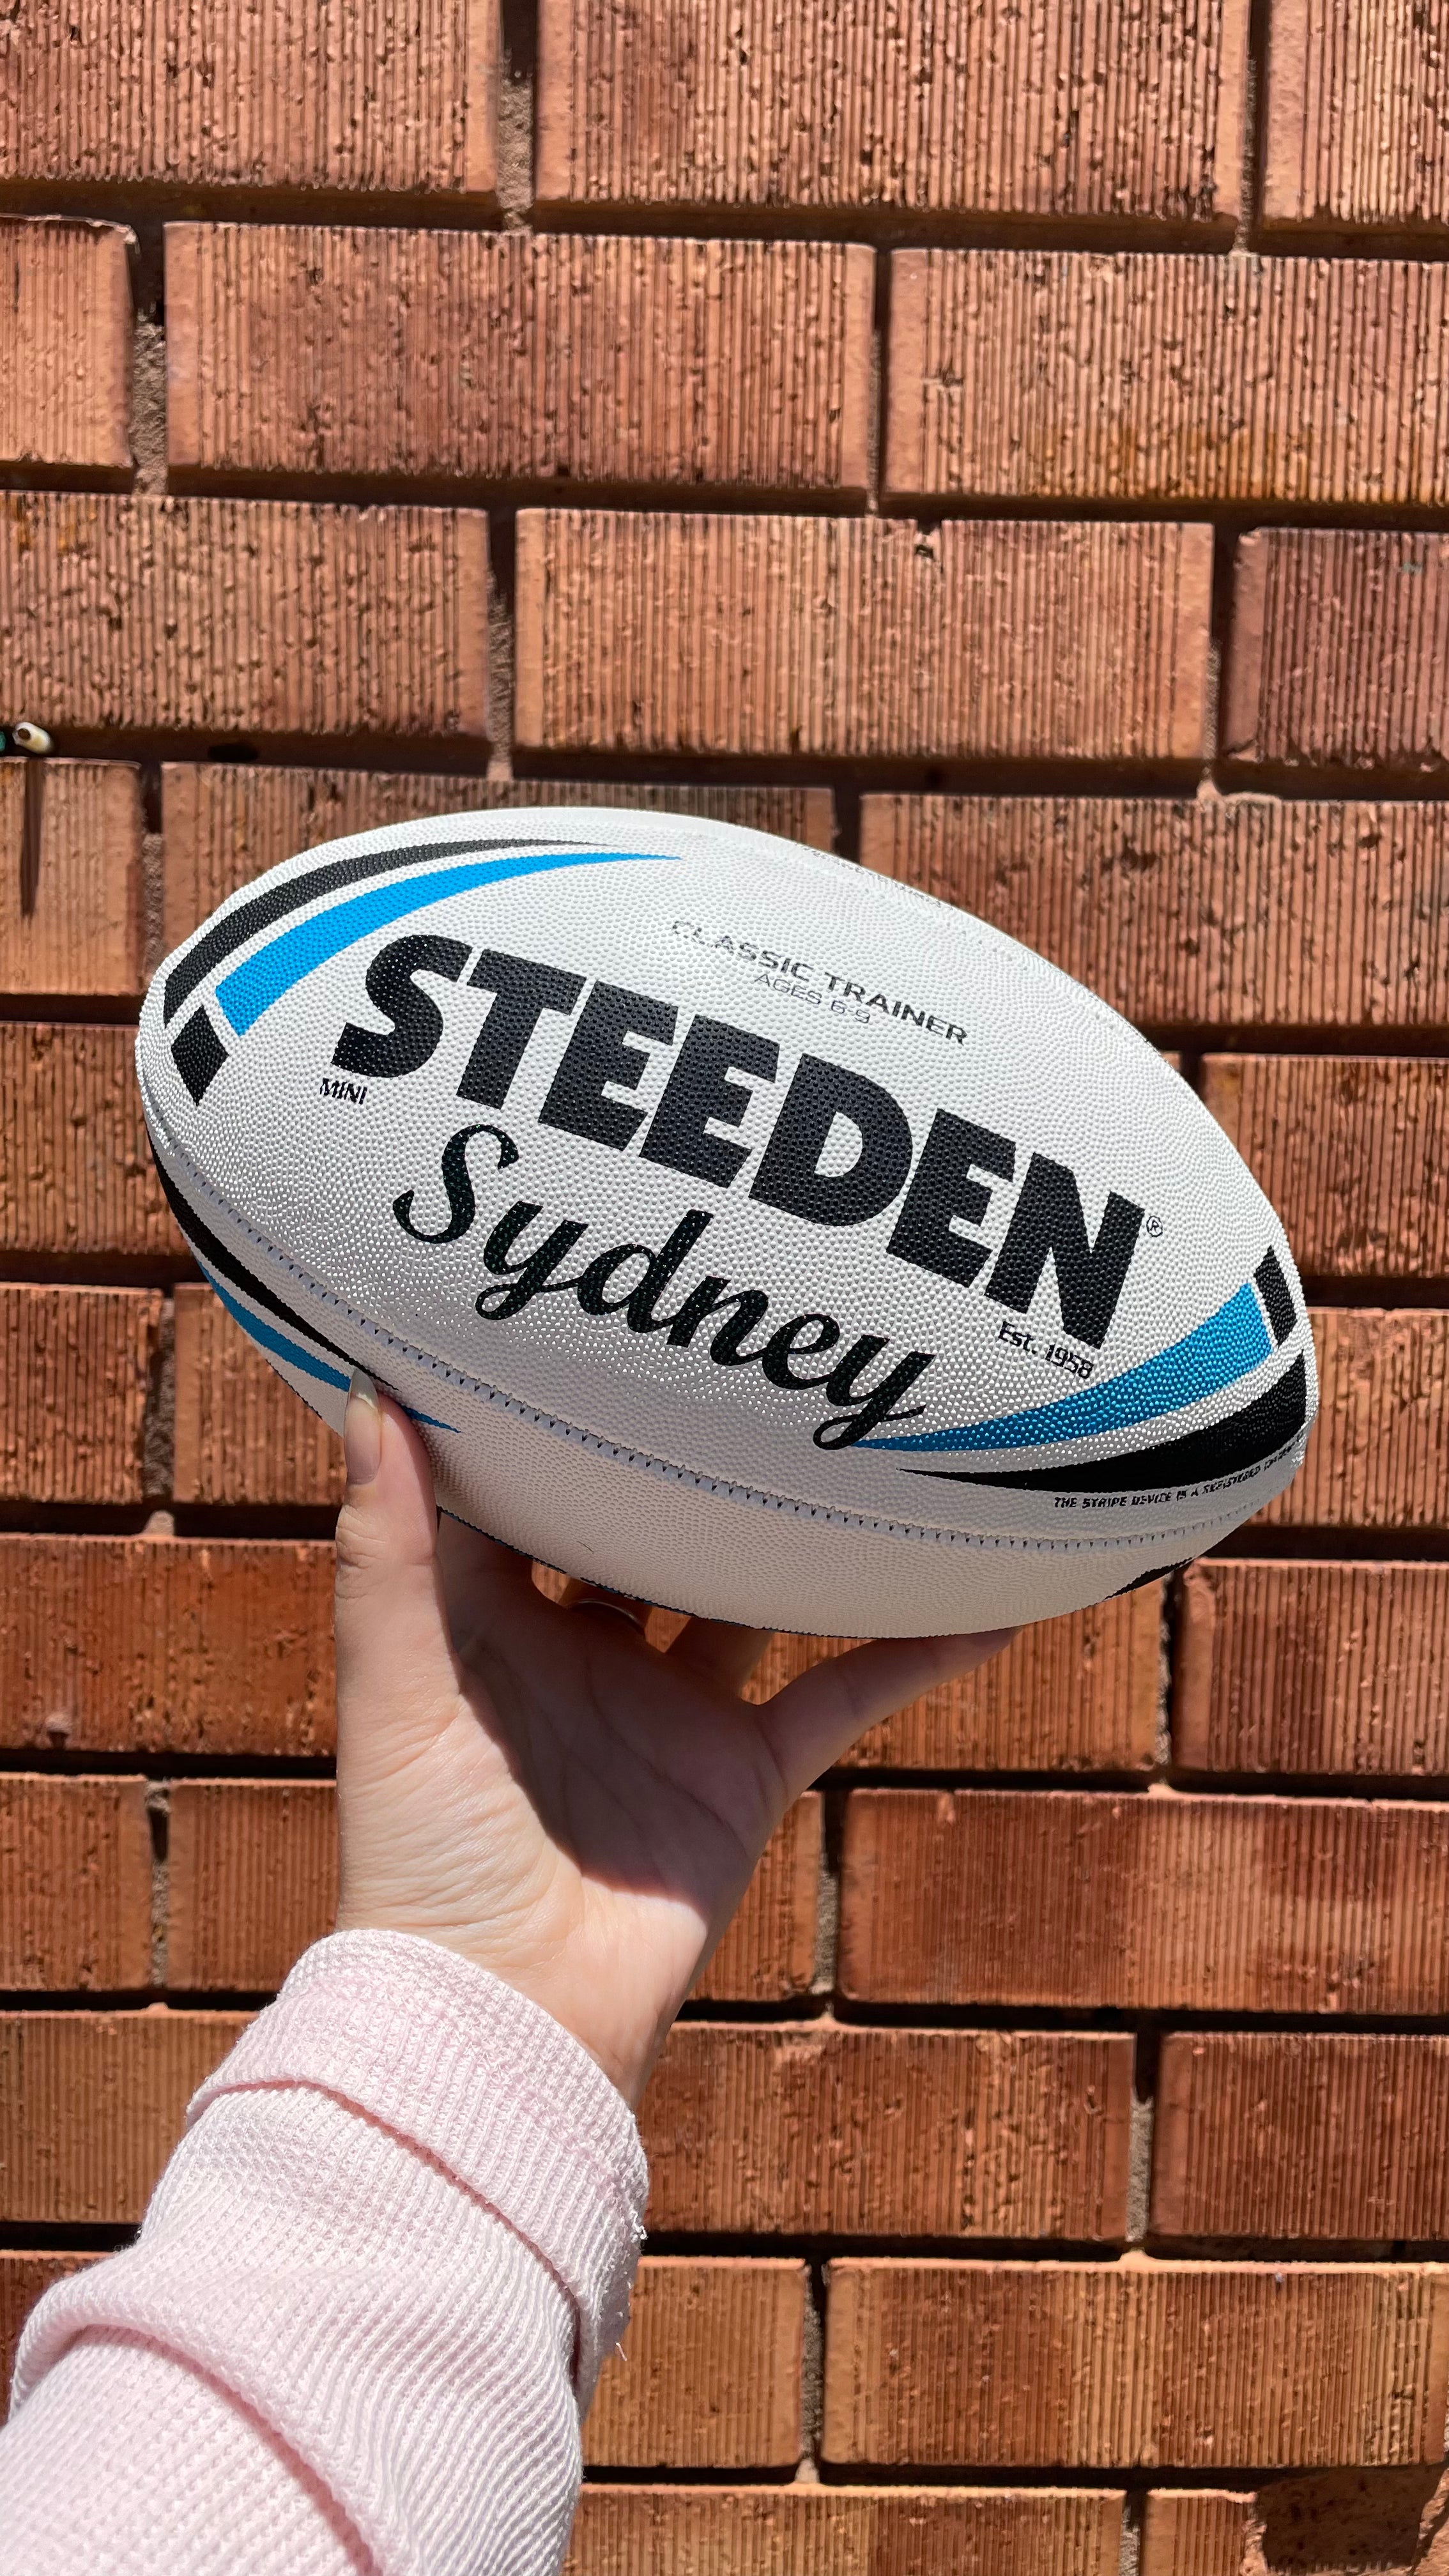 Personalised White/Blue Steeden Rugby League Balls (Mini Size)